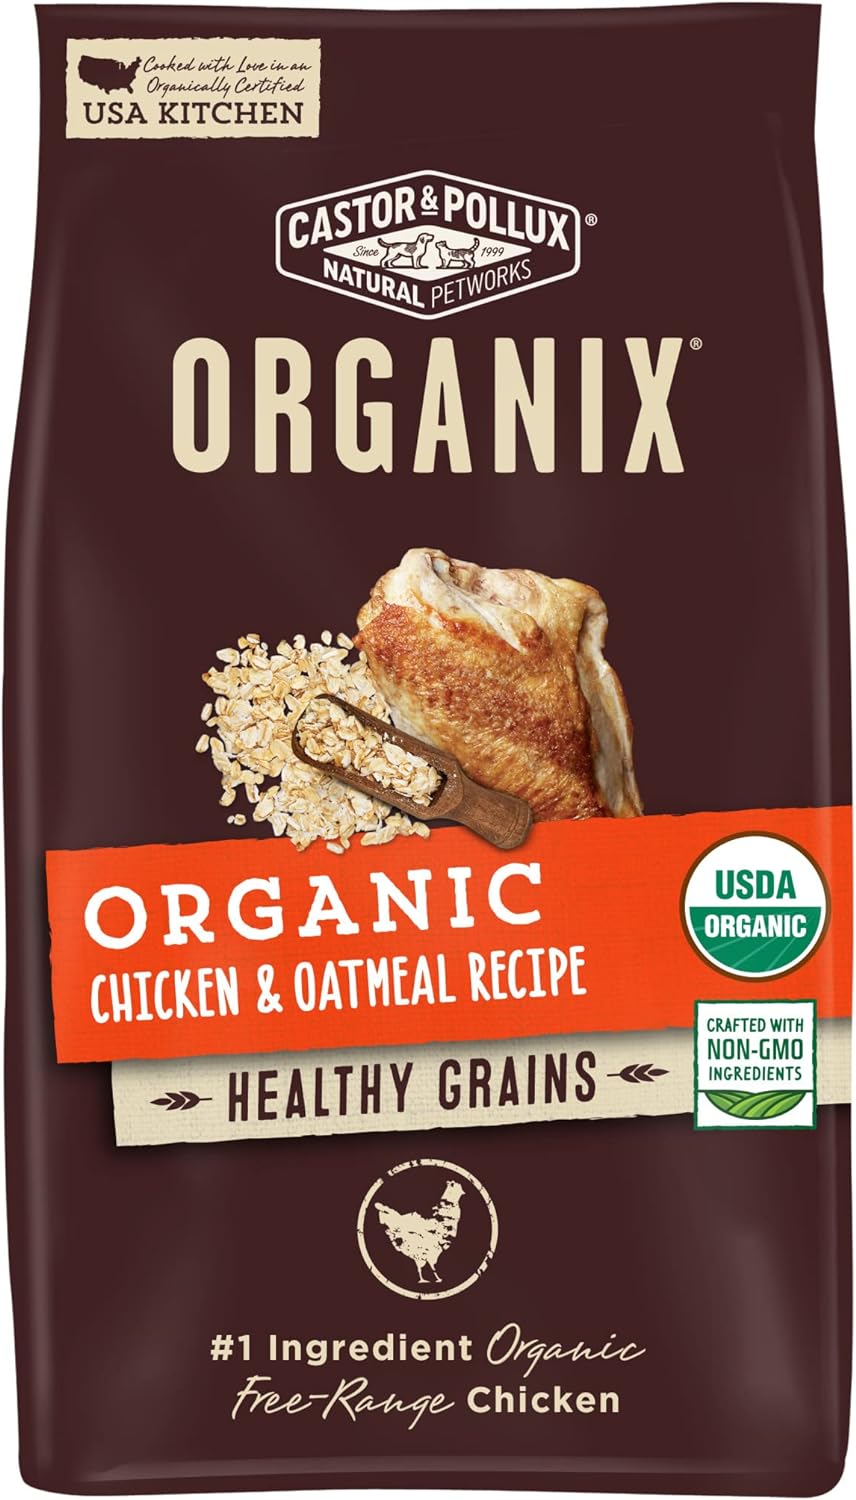 Castor & Pollux Organic Chicken & Oatmeal Recipe with Healthy Grains Dry Dog Food – Gallery Image 1